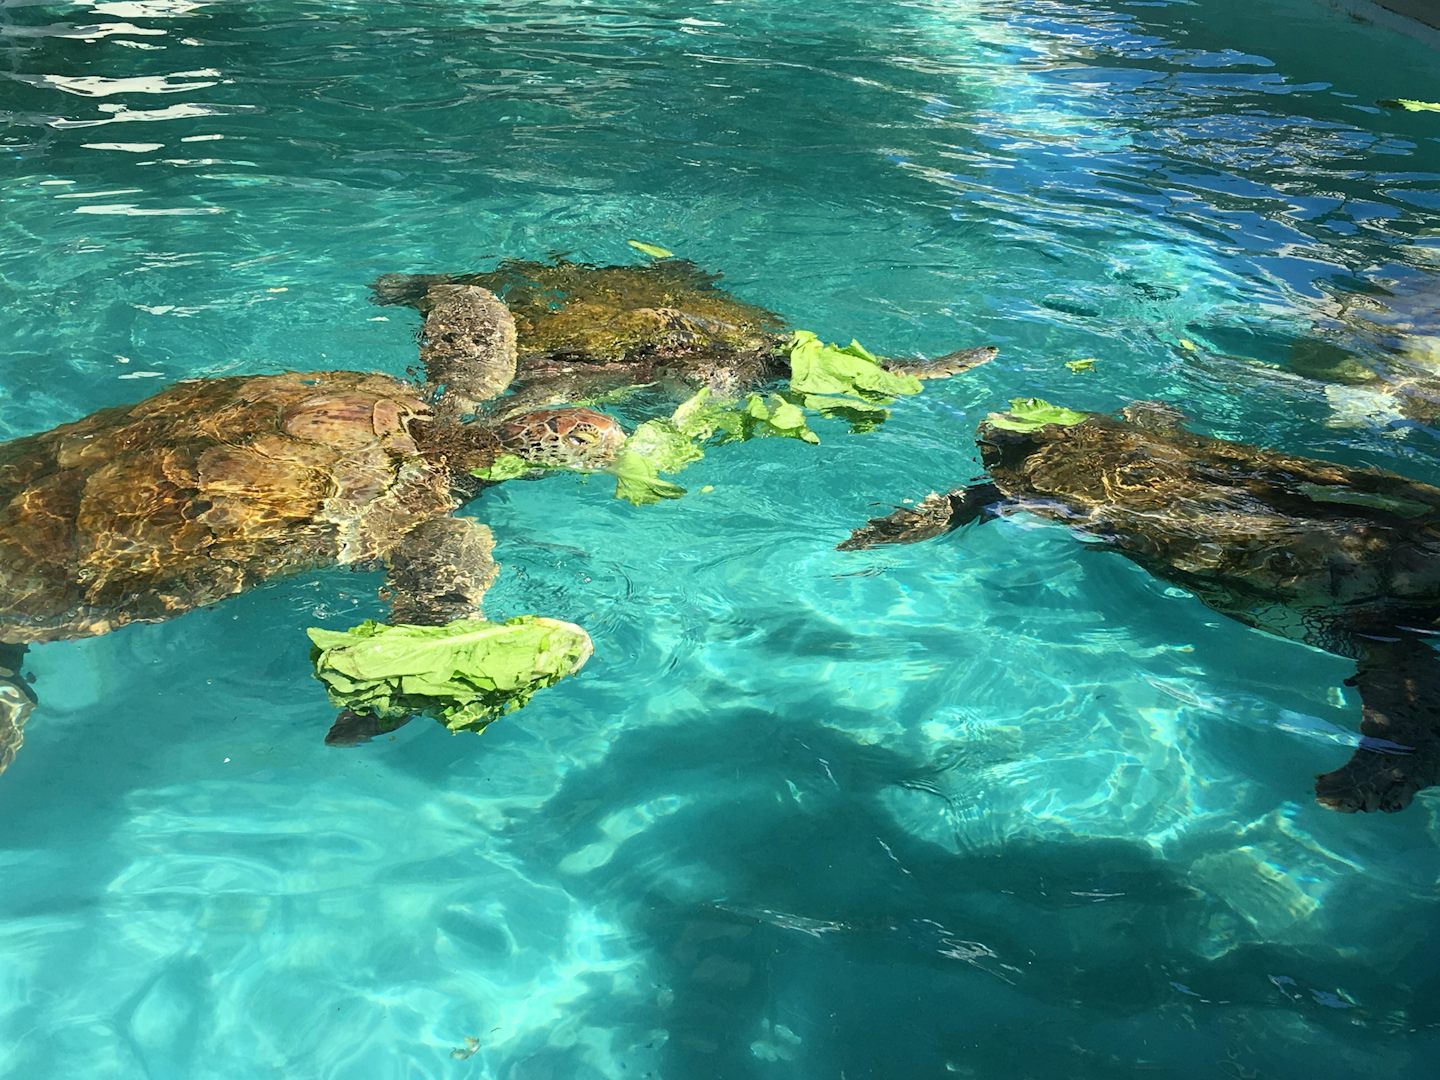 Sea Turtles eating a lunch of lettuce!